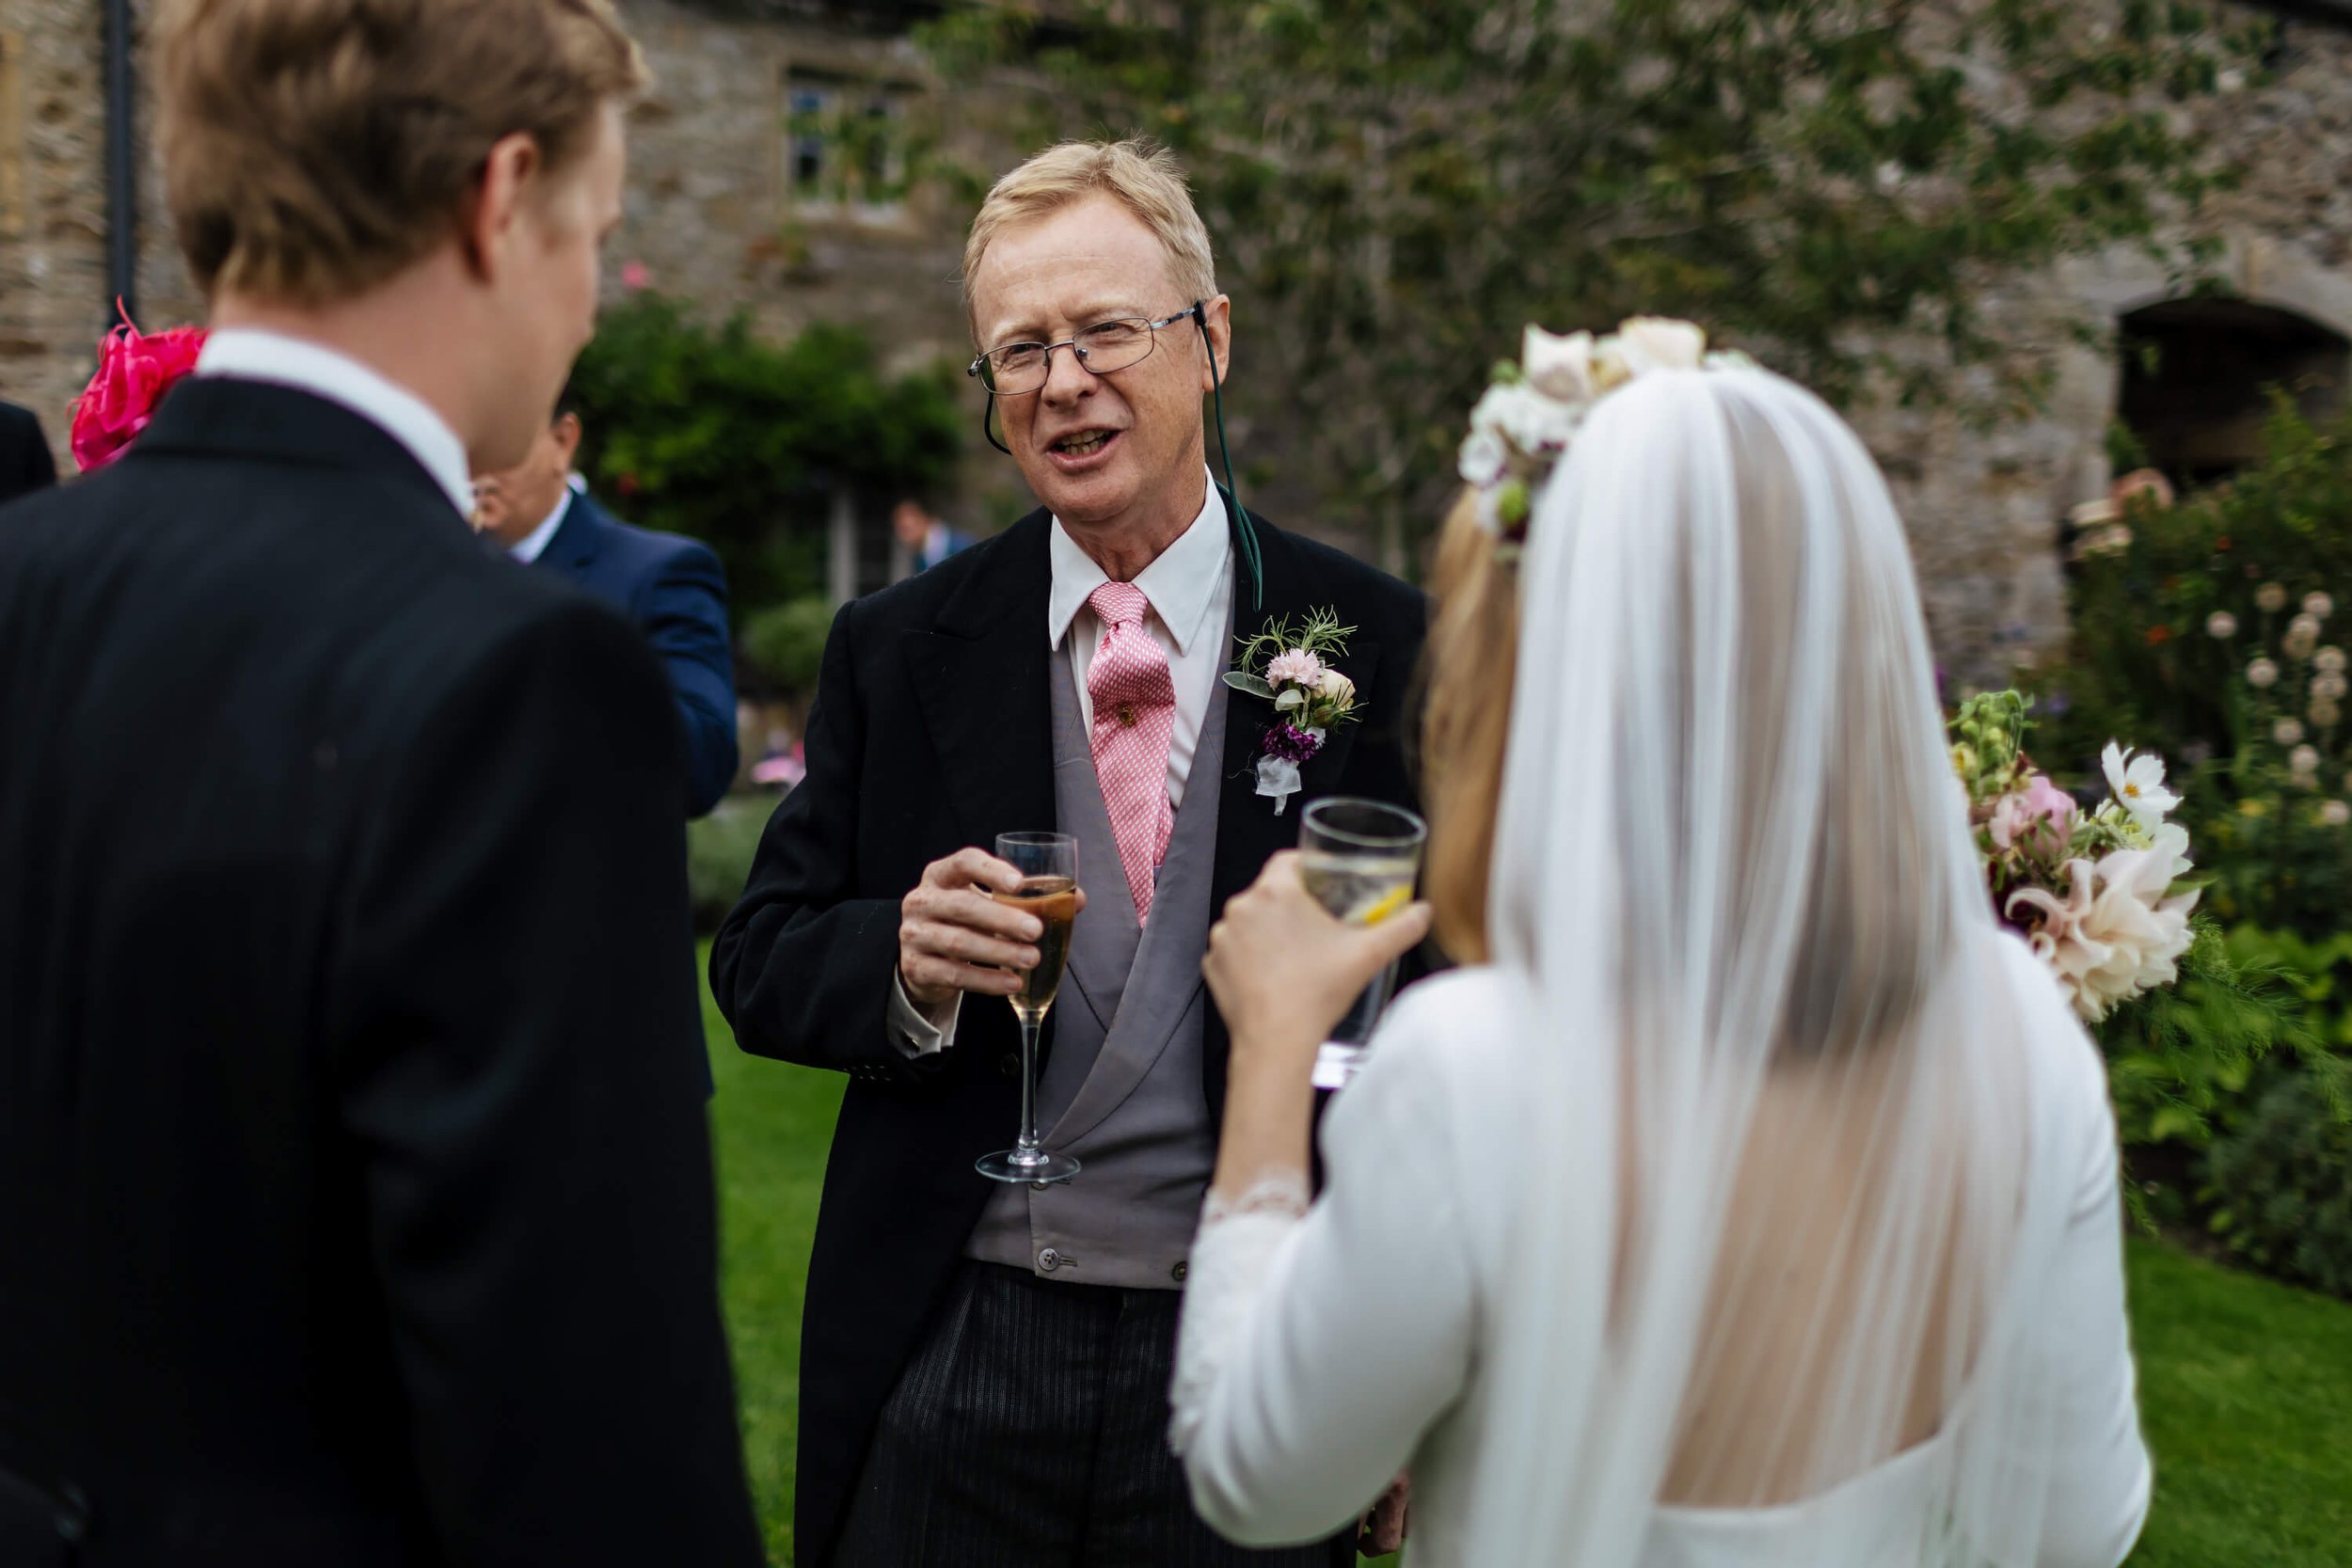 Father of the groom with a glass of bubbly at the wedding